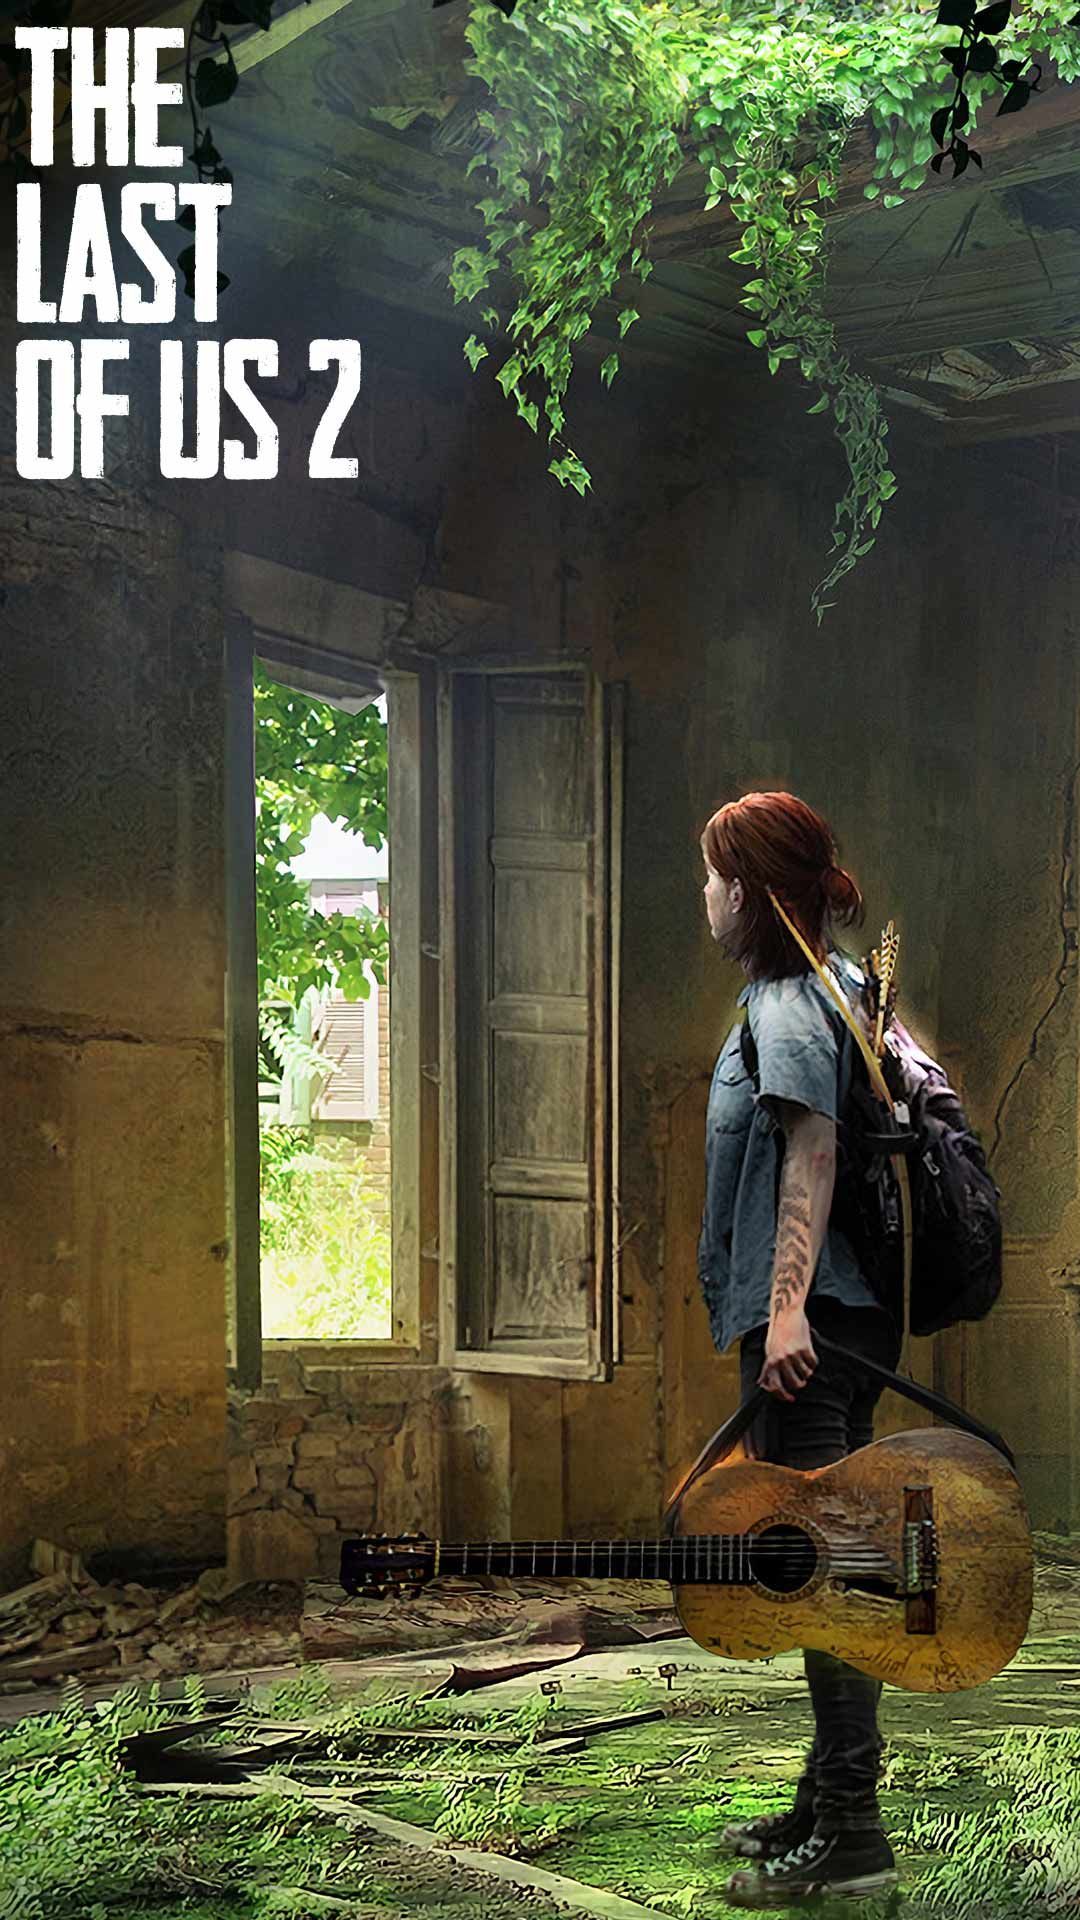 The Last of Us Part II - PlayStation 4  The last of us, Best gaming  wallpapers, Hd phone backgrounds